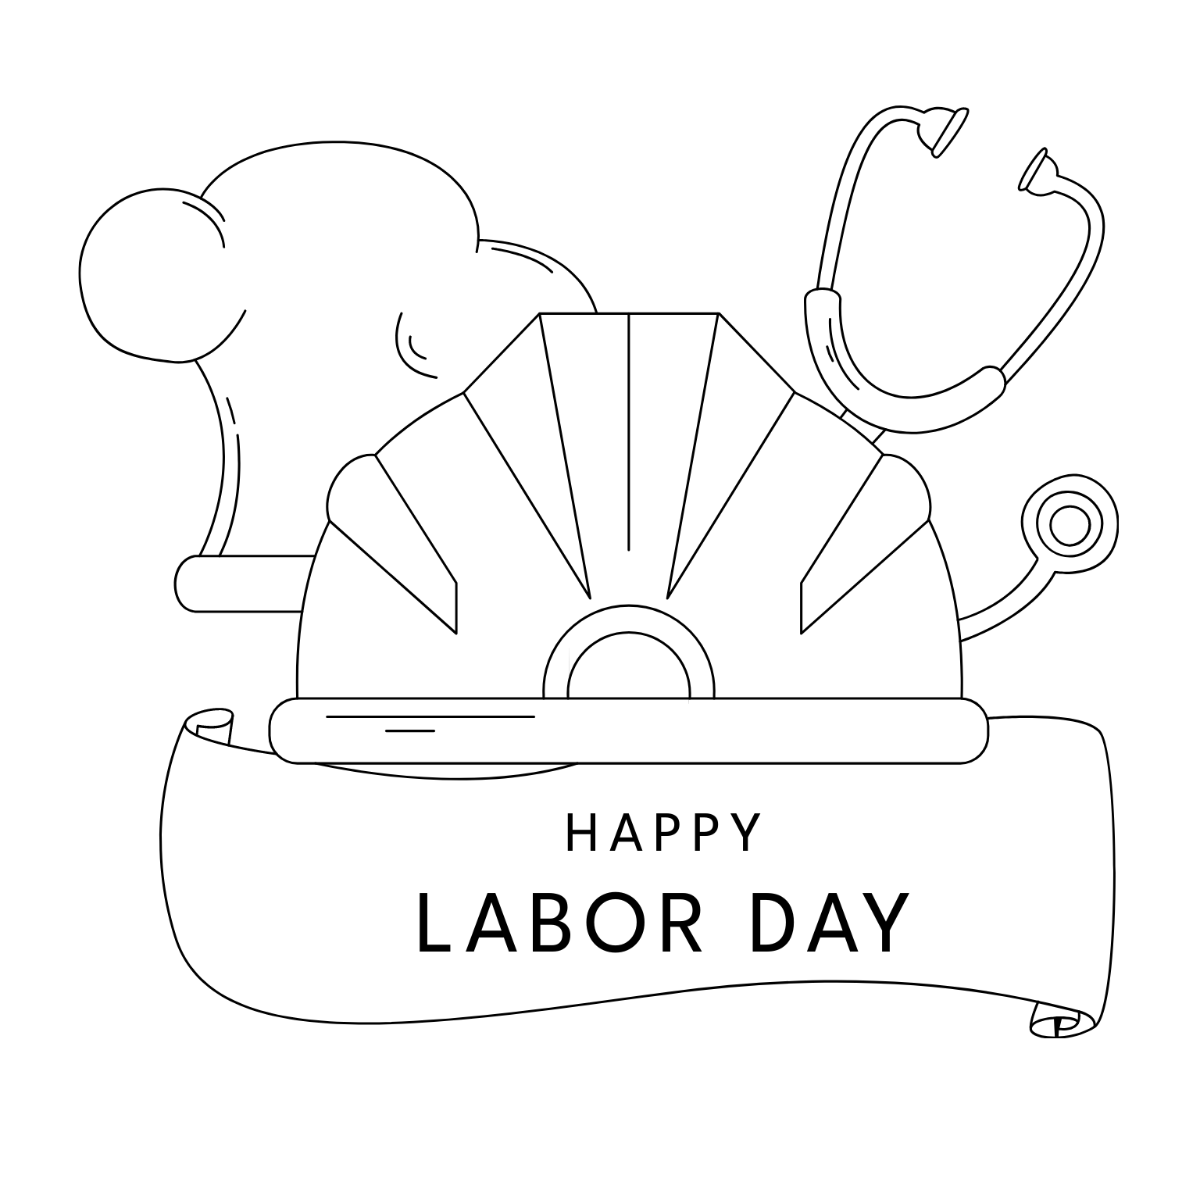 Labor Day Illustrator Drawing Template